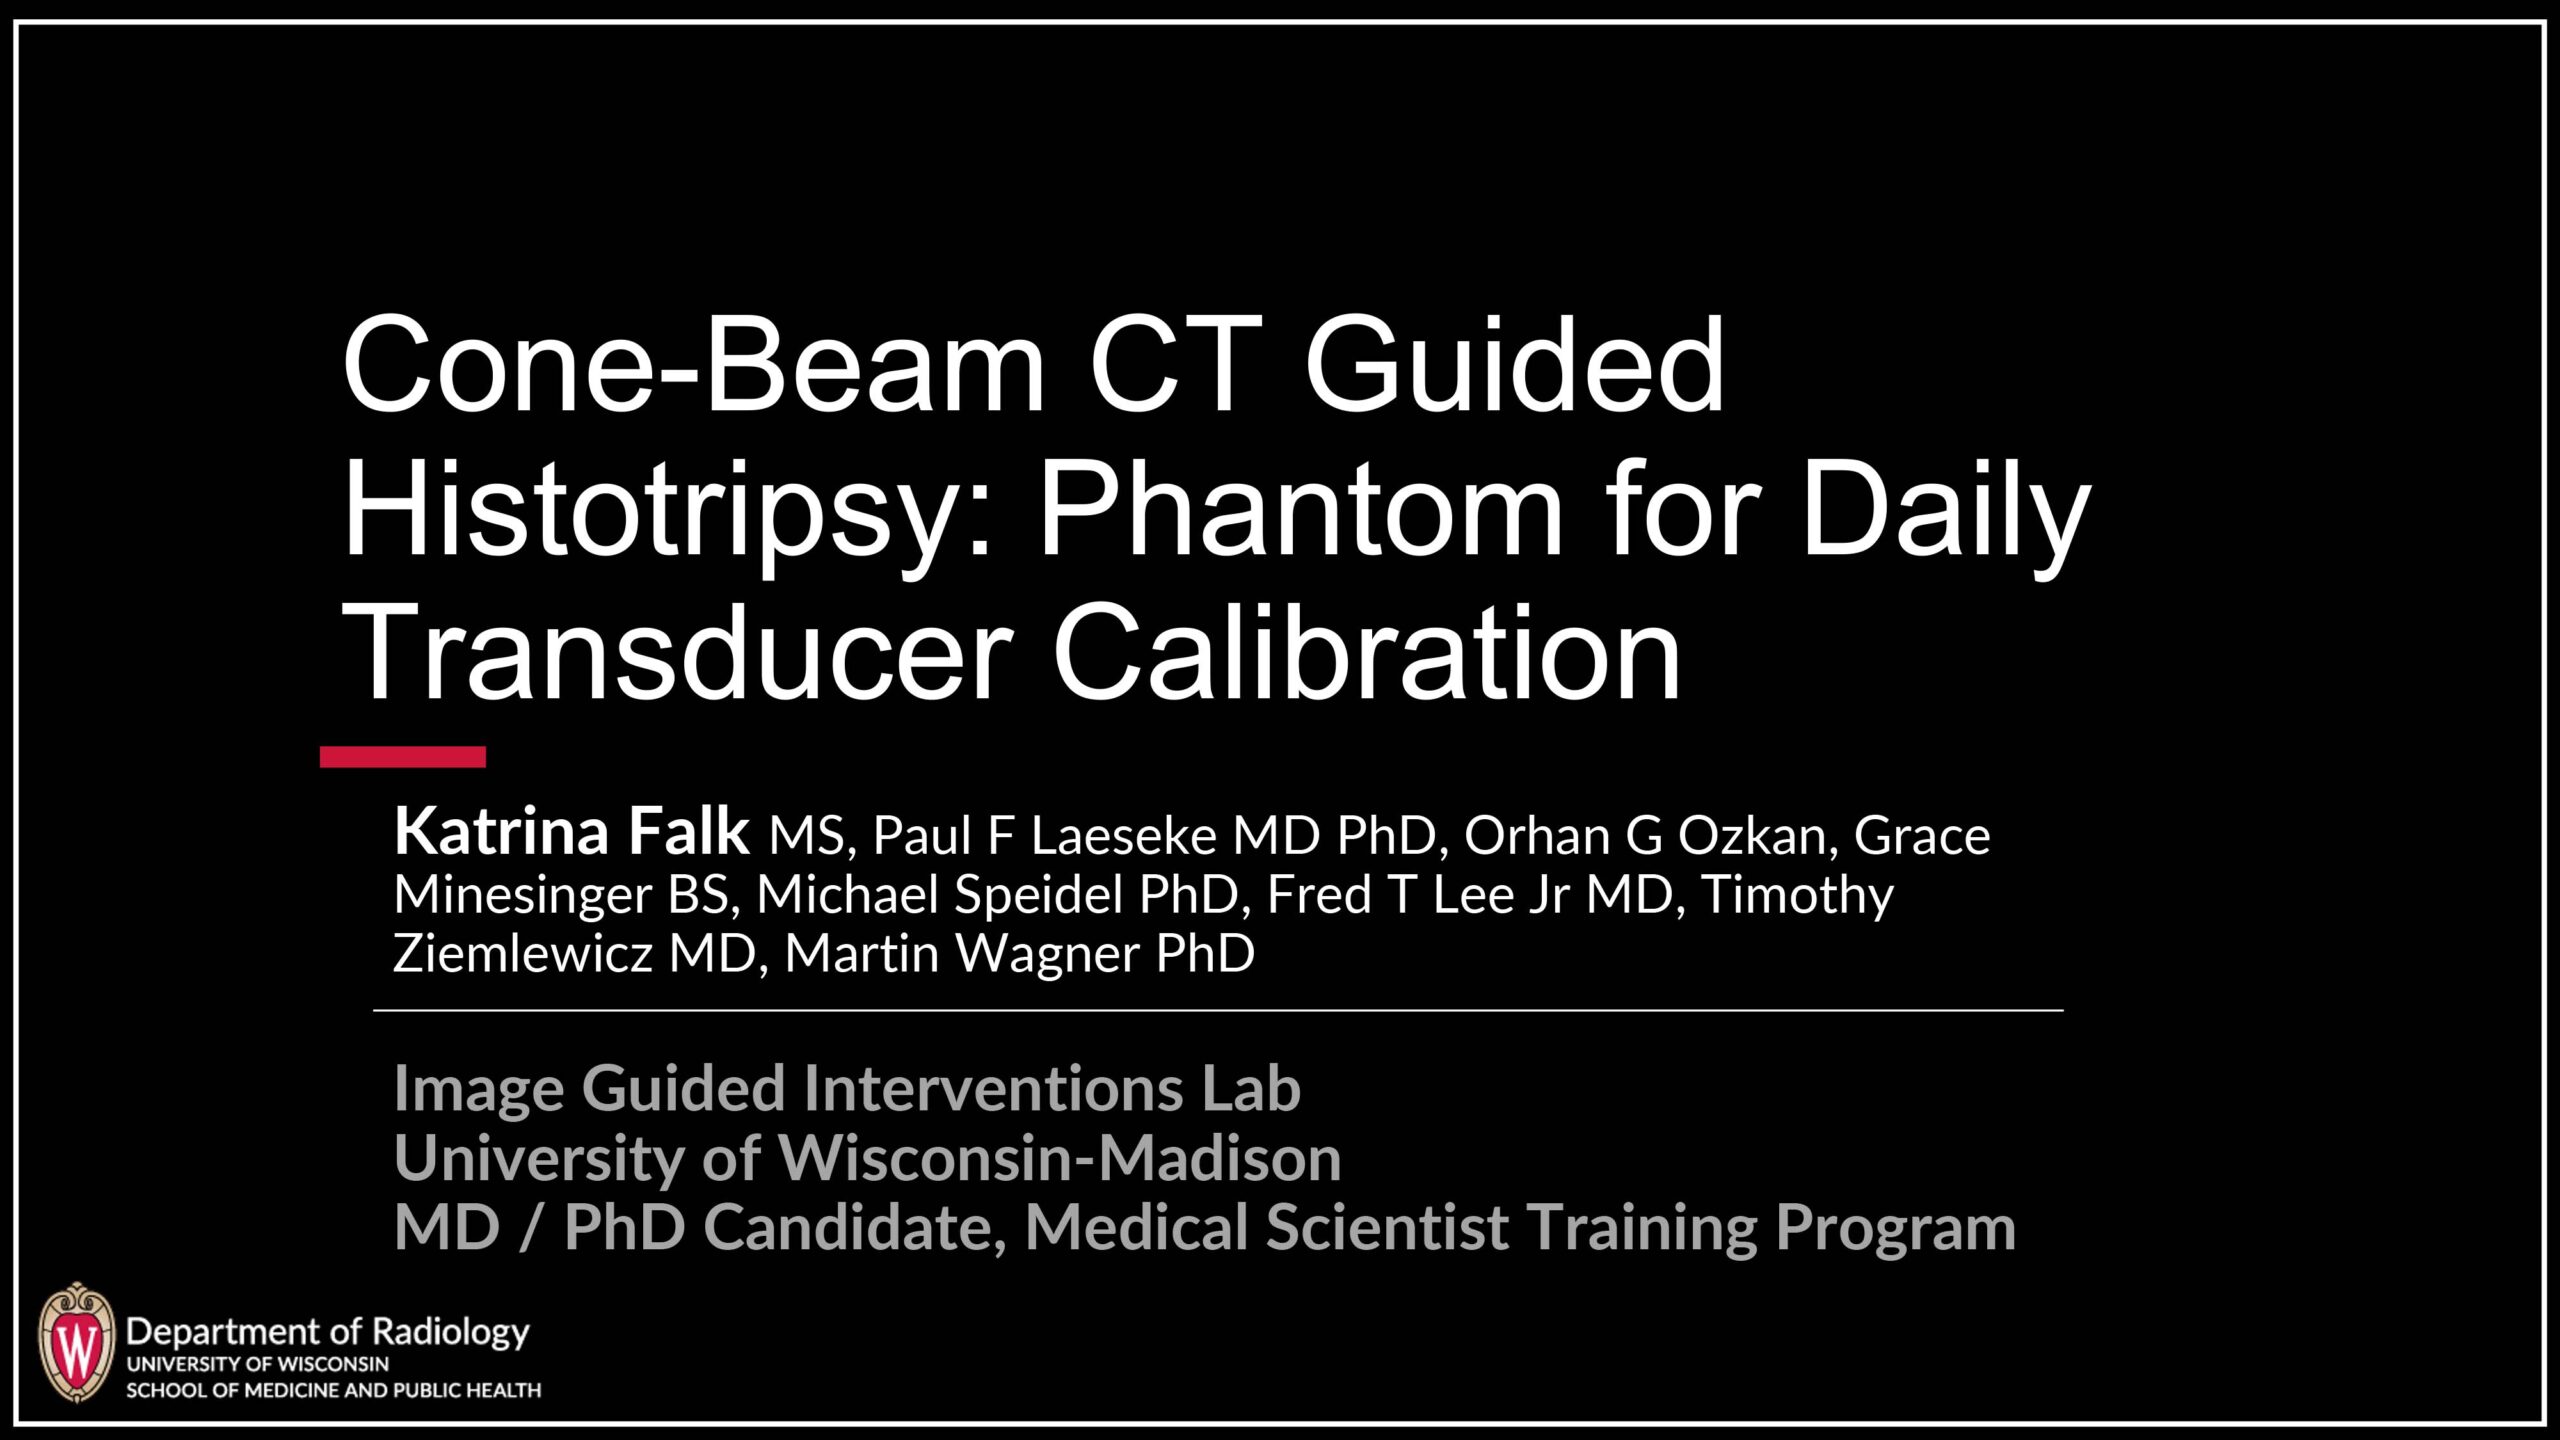 Cone-beam CT Guided Histotripsy: Phantom for Daily Transducer Calibration